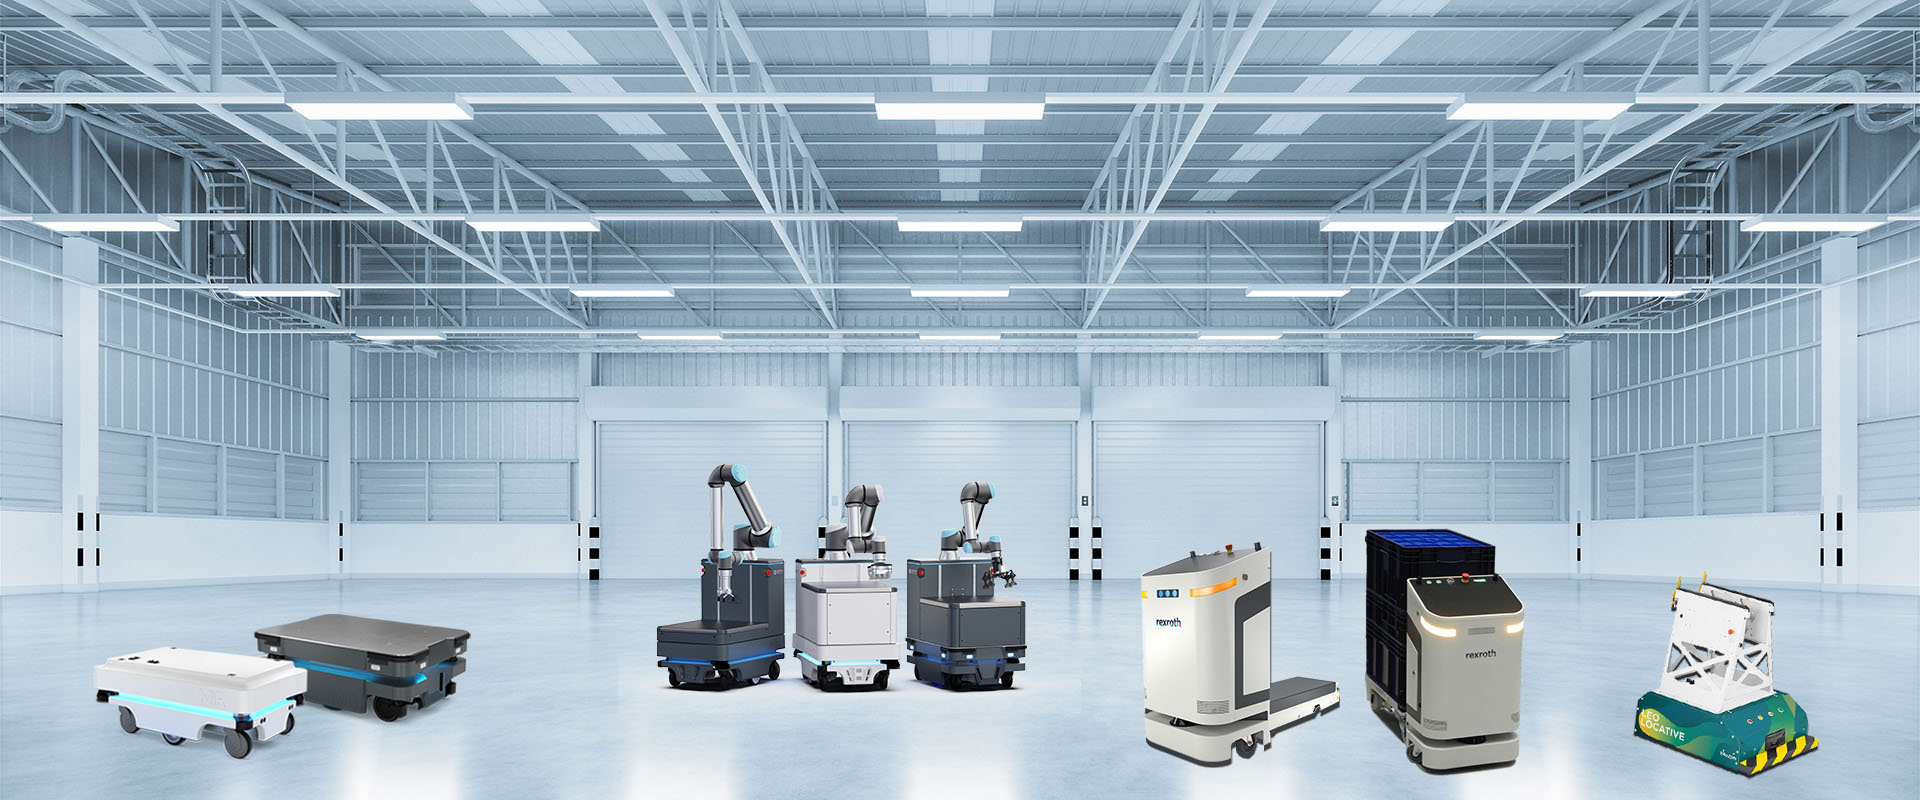 Find driverless transport systems for your intralogistic small parts & SLC transport at MOBILE ROBOTS by DAHL Robotics, your integrator for autonomous mobile robots.